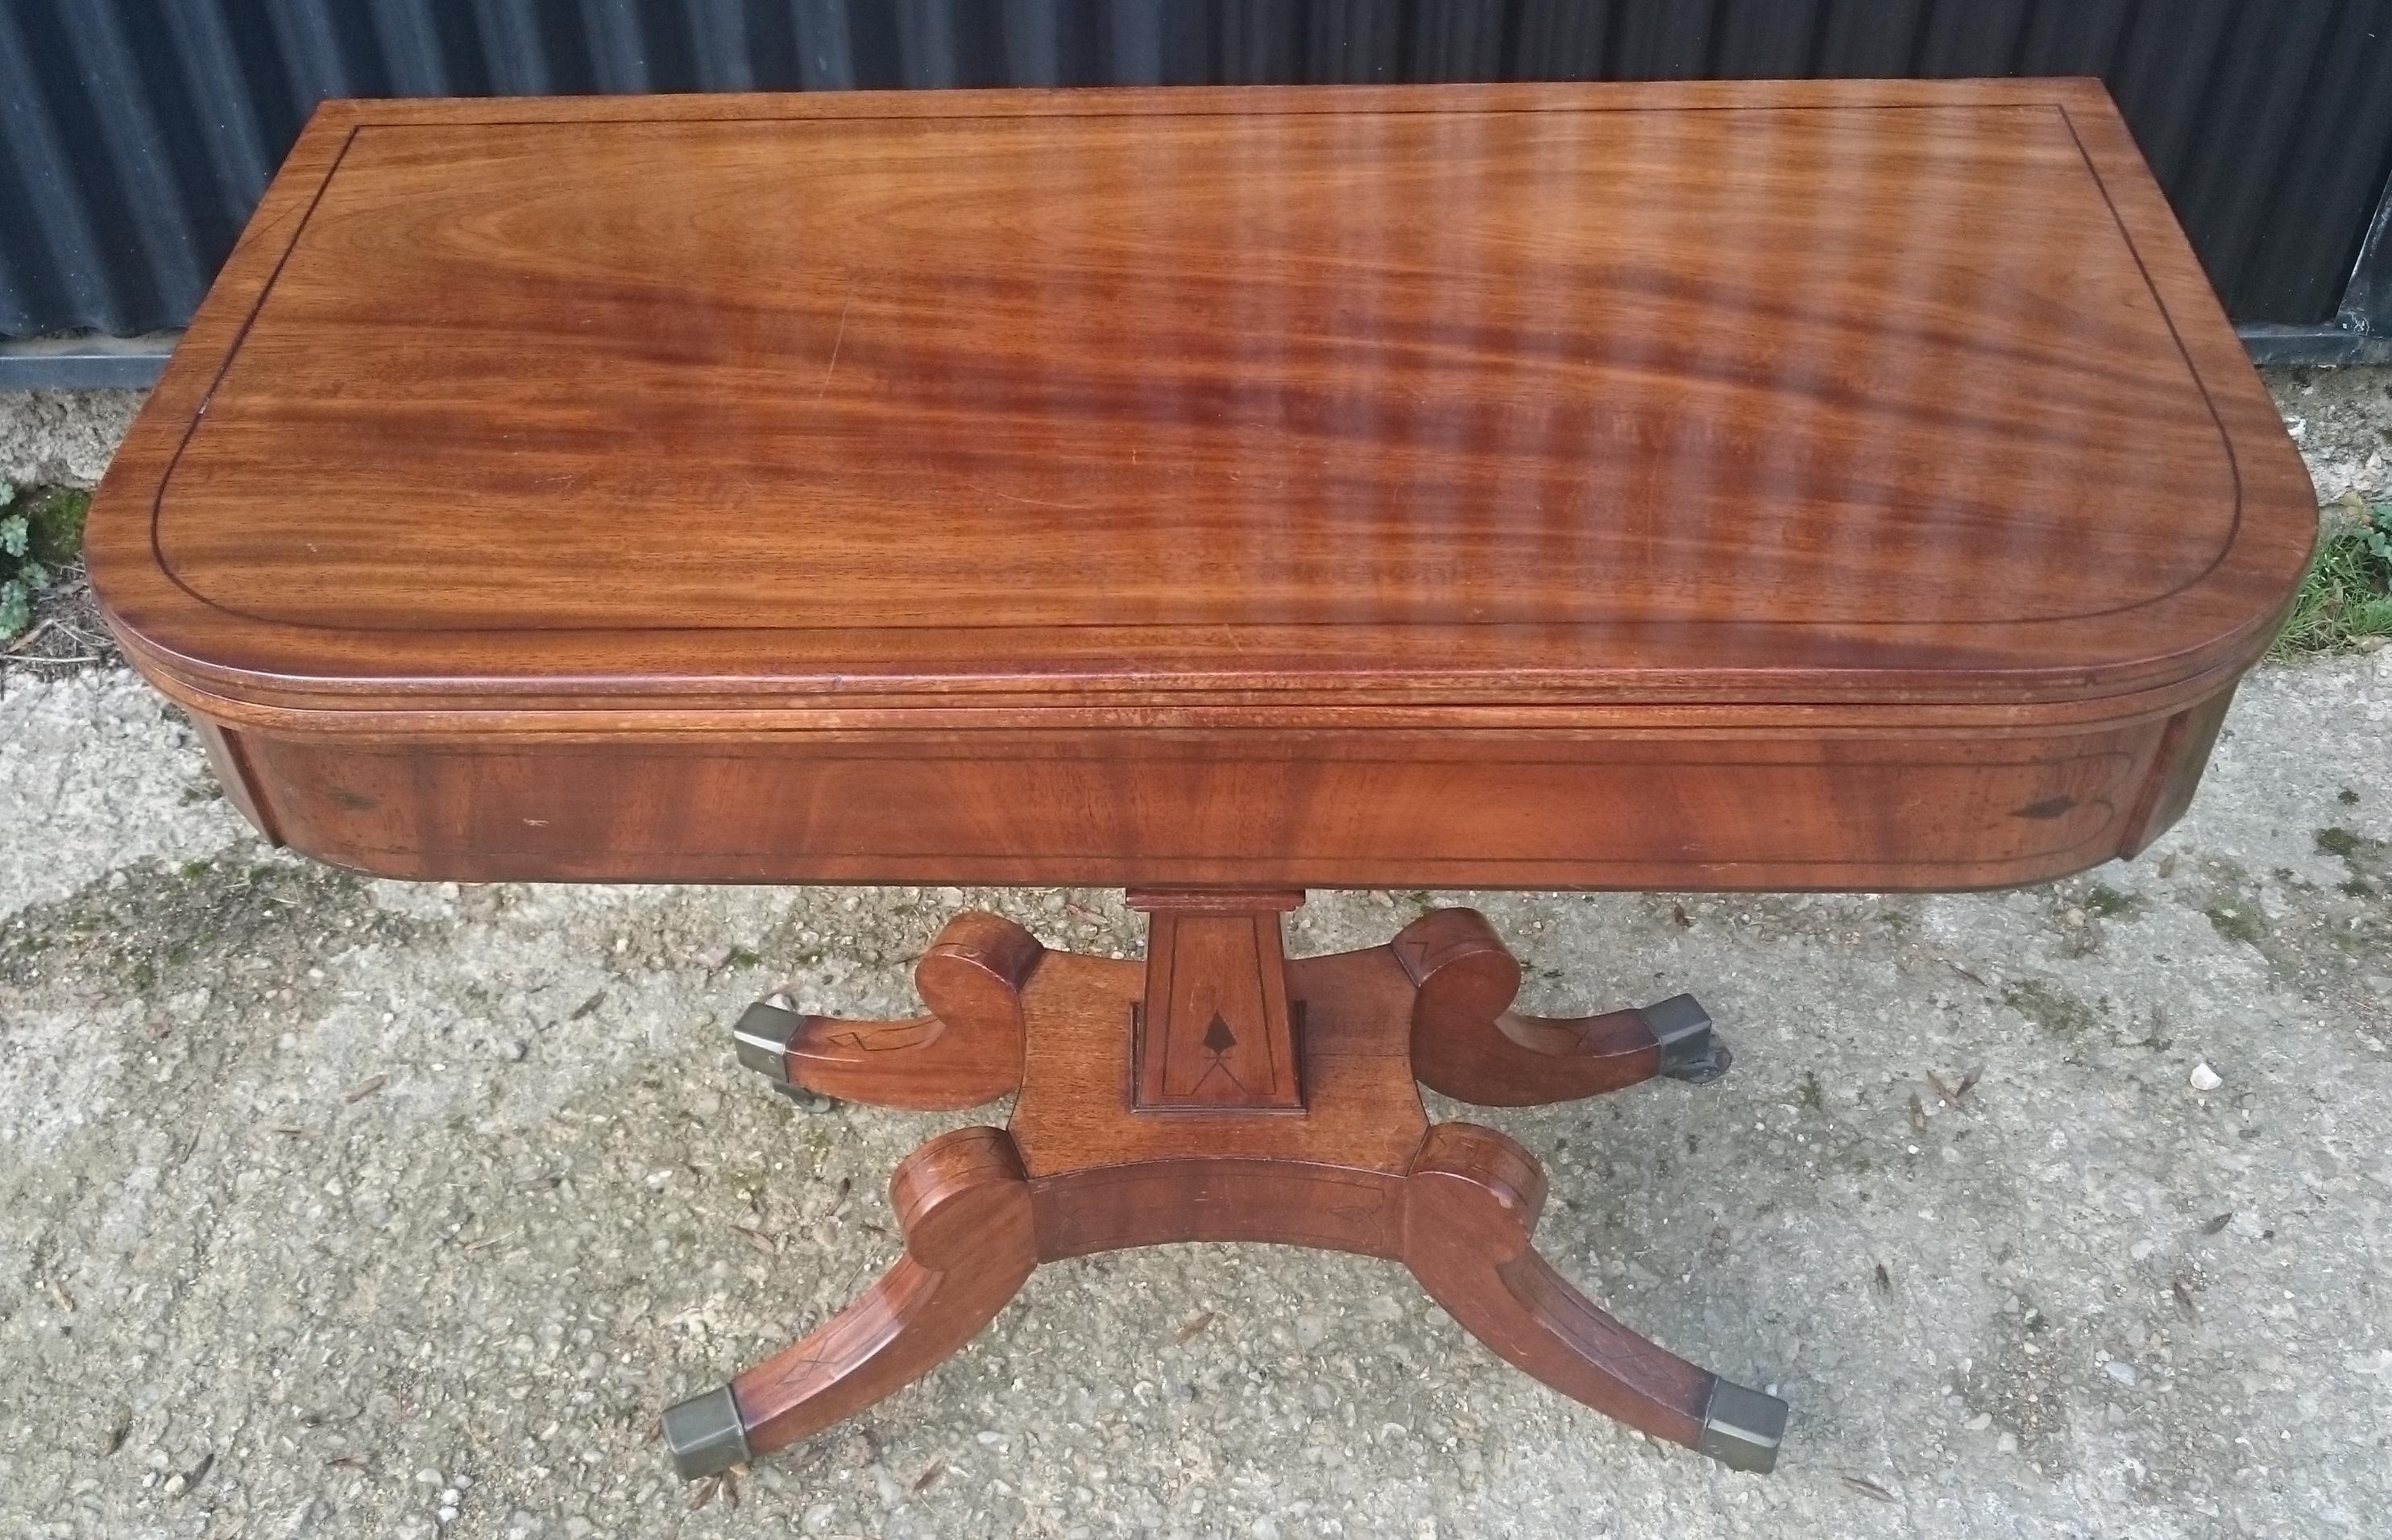 Early 19th century Regency mahogany antique card table standing on four splay base with a square column. There is ebony stringing to the edge, top, frieze and legs. The timber is a good quality piece of mahogany with lovely grain pattern which has